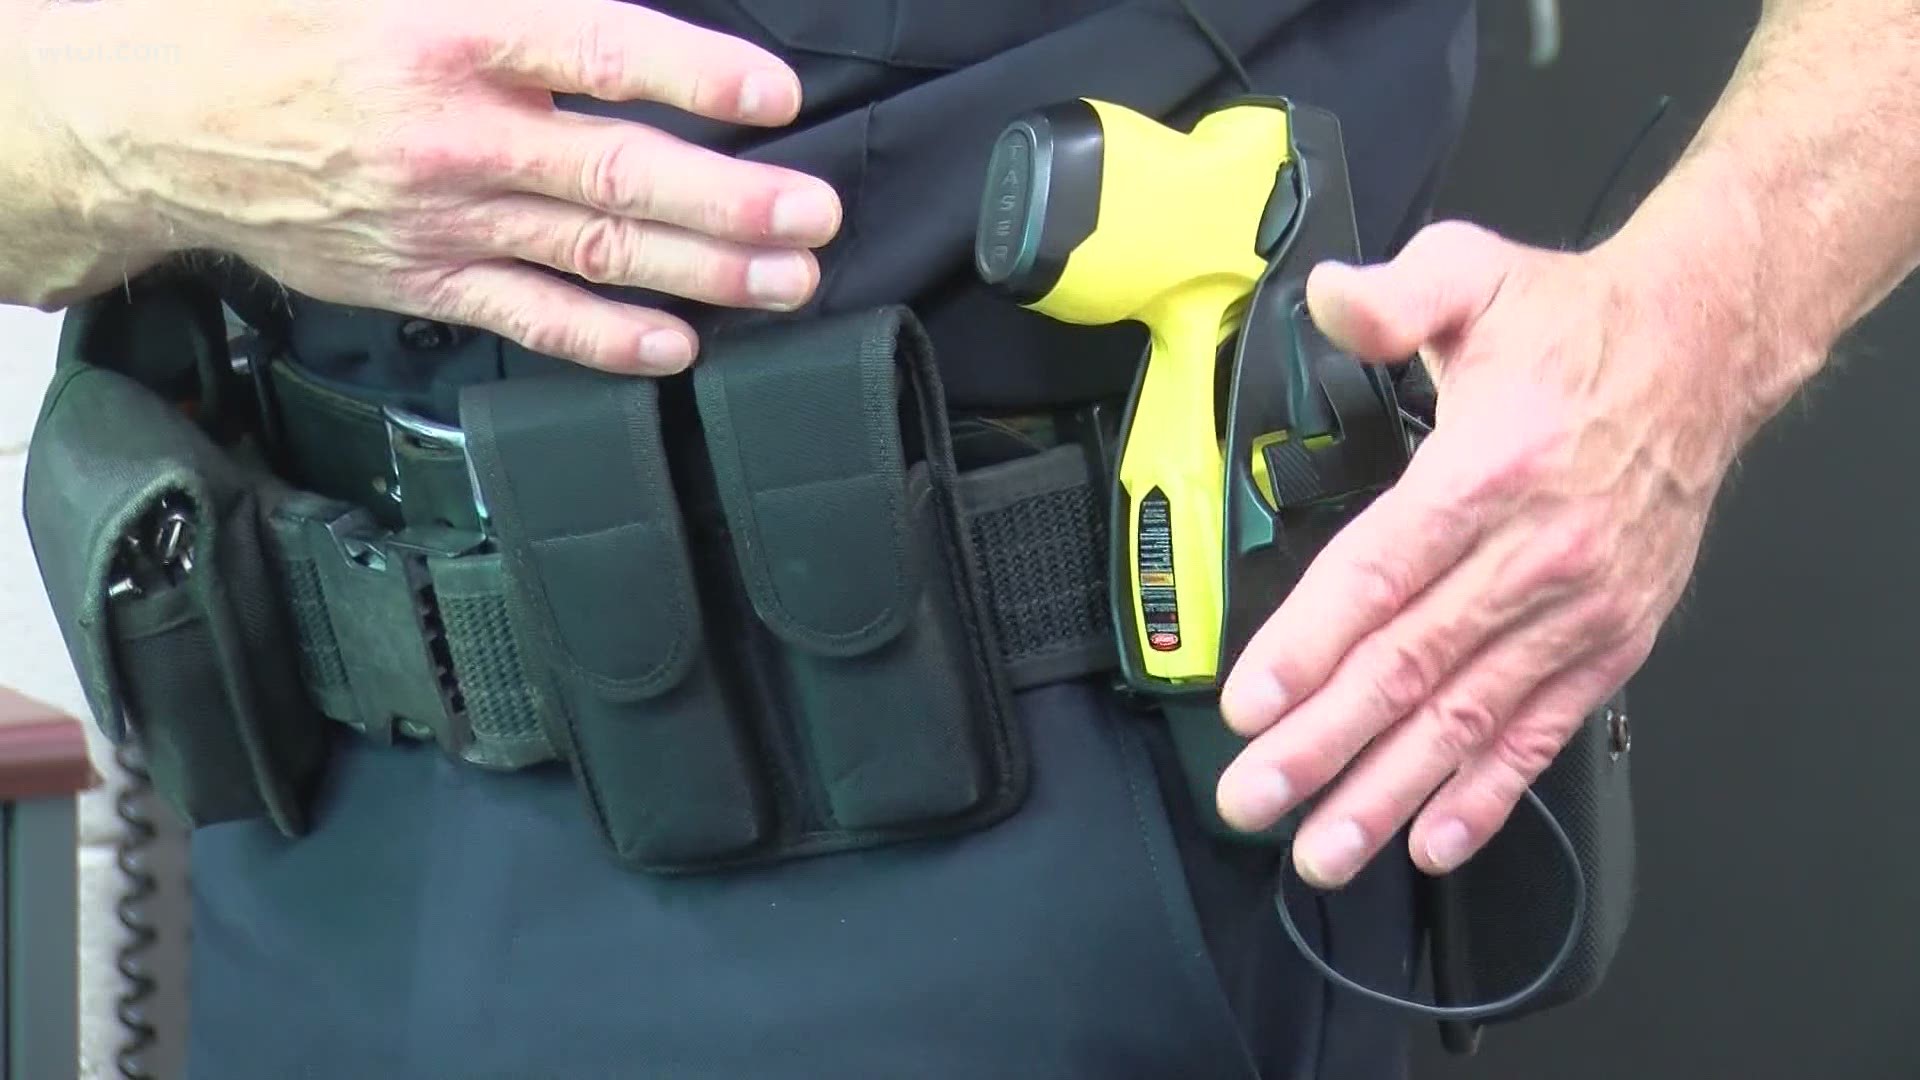 When it comes to officer-issued tasers, the ones used by the Oregon Police Division are distinctive.